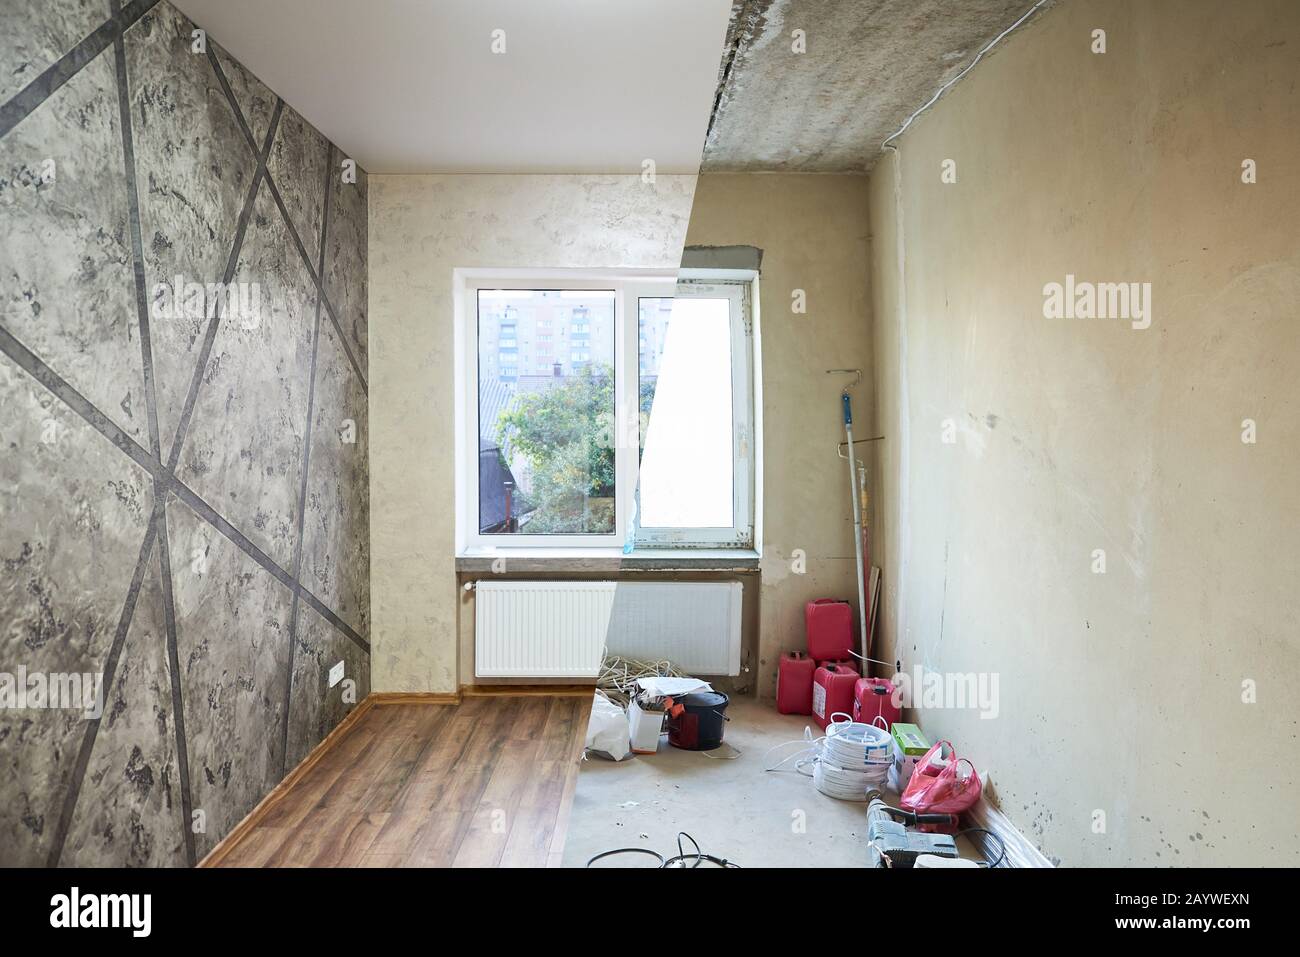 Living room before and after renovation works, new window, window sill, grey wallpapers and wood textured laminate, renovation concept Stock Photo